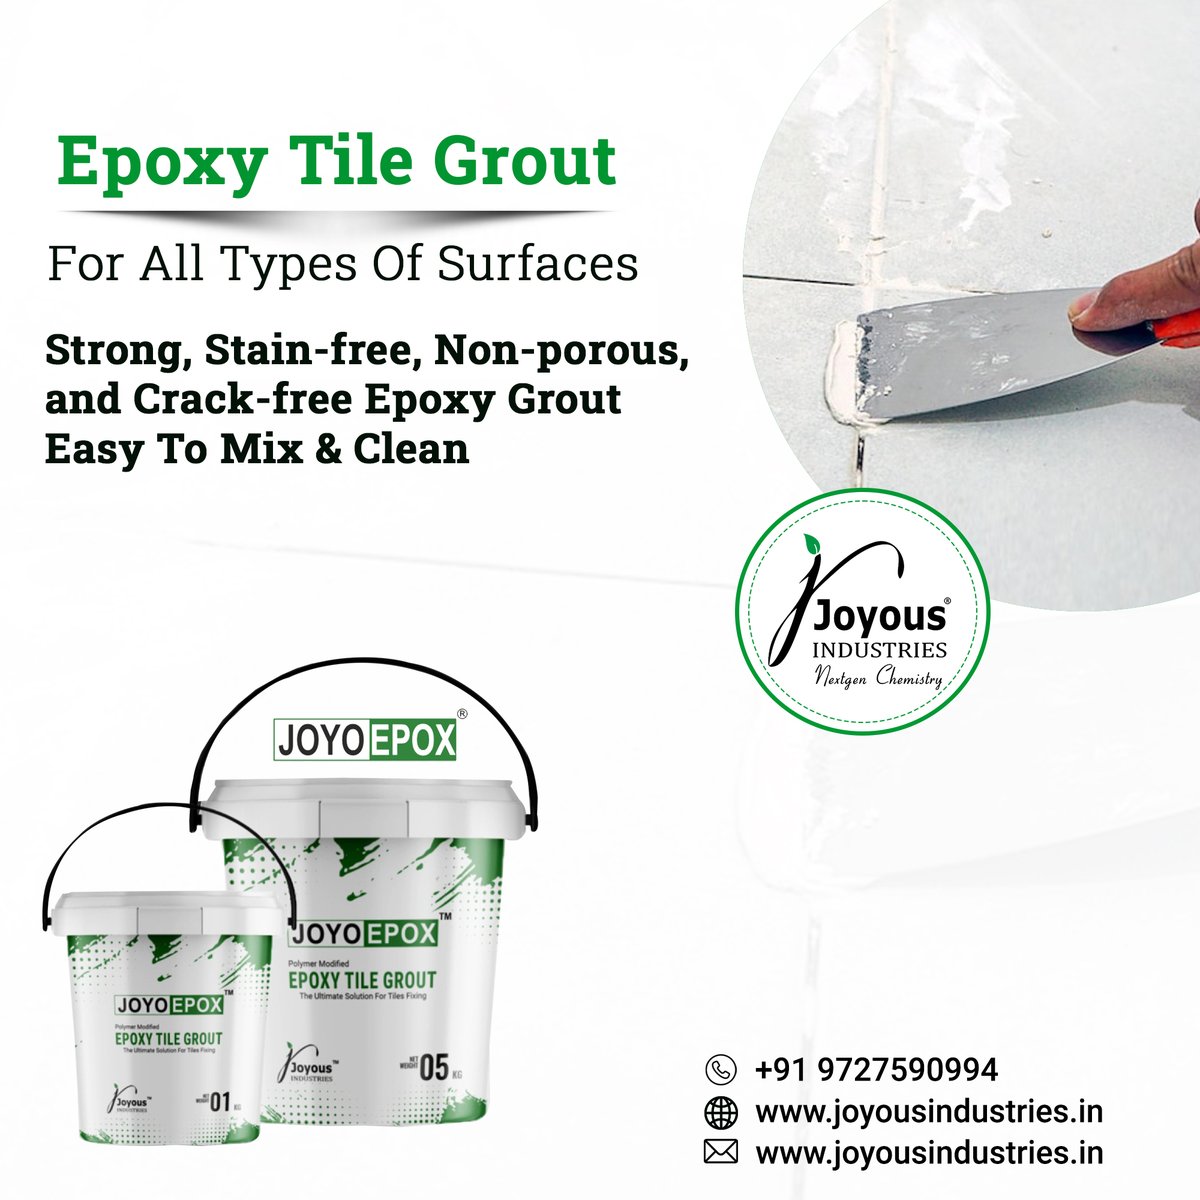 Joyo Epoxy offers a top-quality epoxy tile grout suitable for all surfaces. It is strong, stain-free, non-porous, and crack-free, ensuring durability. With easy mixing and cleaning, Joyo Epoxy provides a hassle-free grouting experience.

#SurfaceSolutions #StrongAndDurable